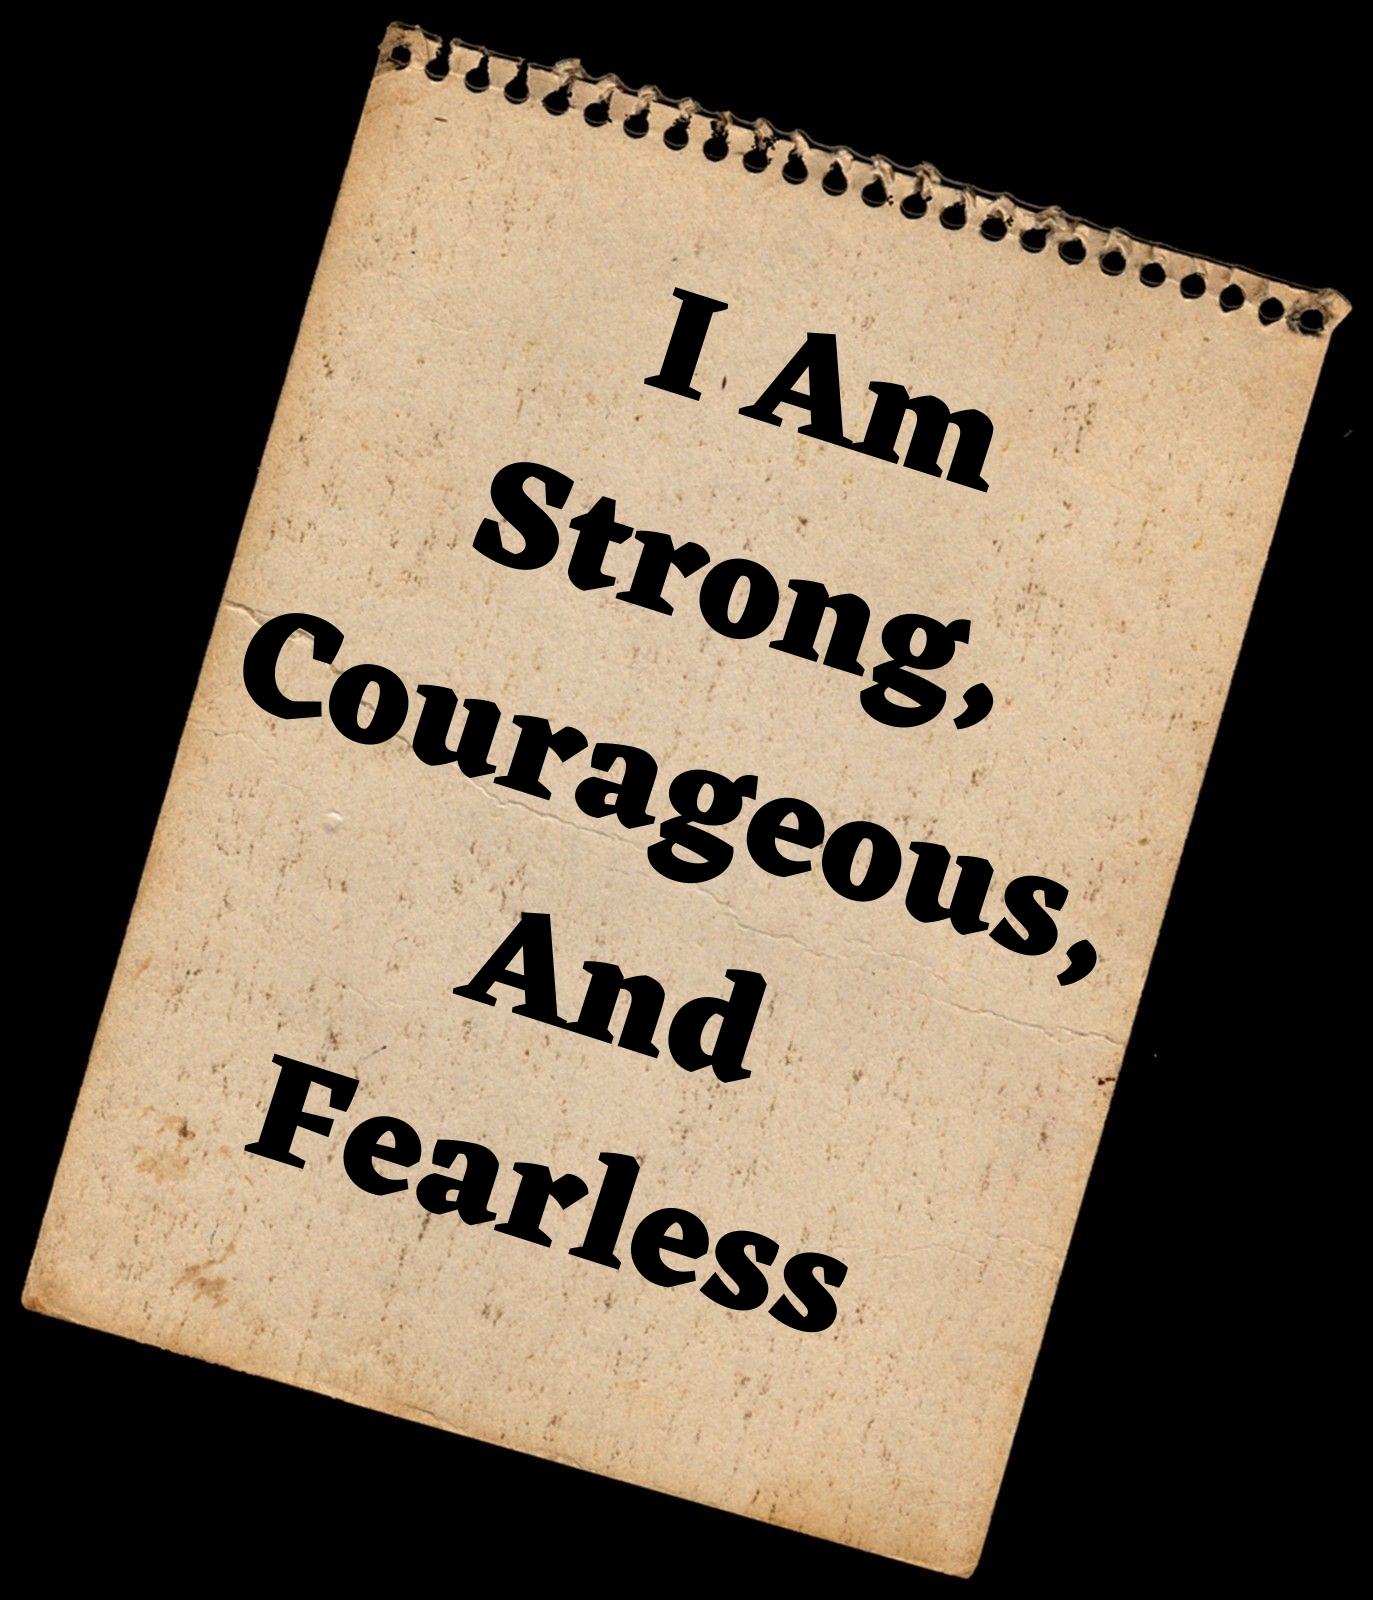  I AM STRONG, COURAGEOUS, AND FEARLESS.